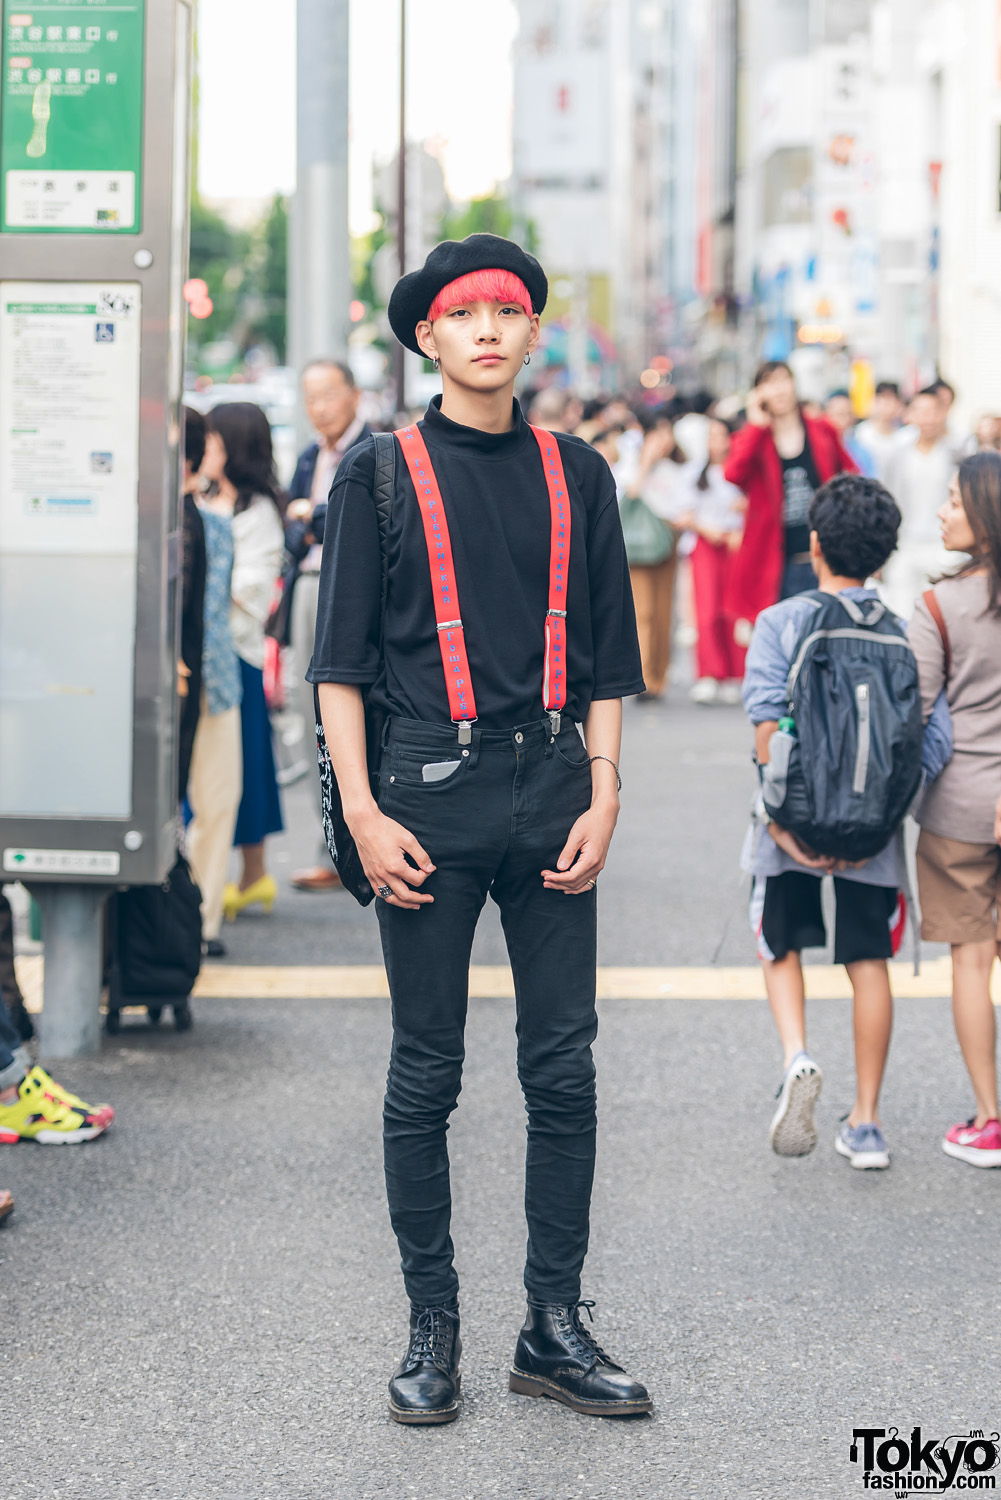 Pink-Haired Harajuku Guy in Black & Red w/ Gosha Rubchinskiy, Who's Who Gallery, Chrome Hearts & Dr. Martens